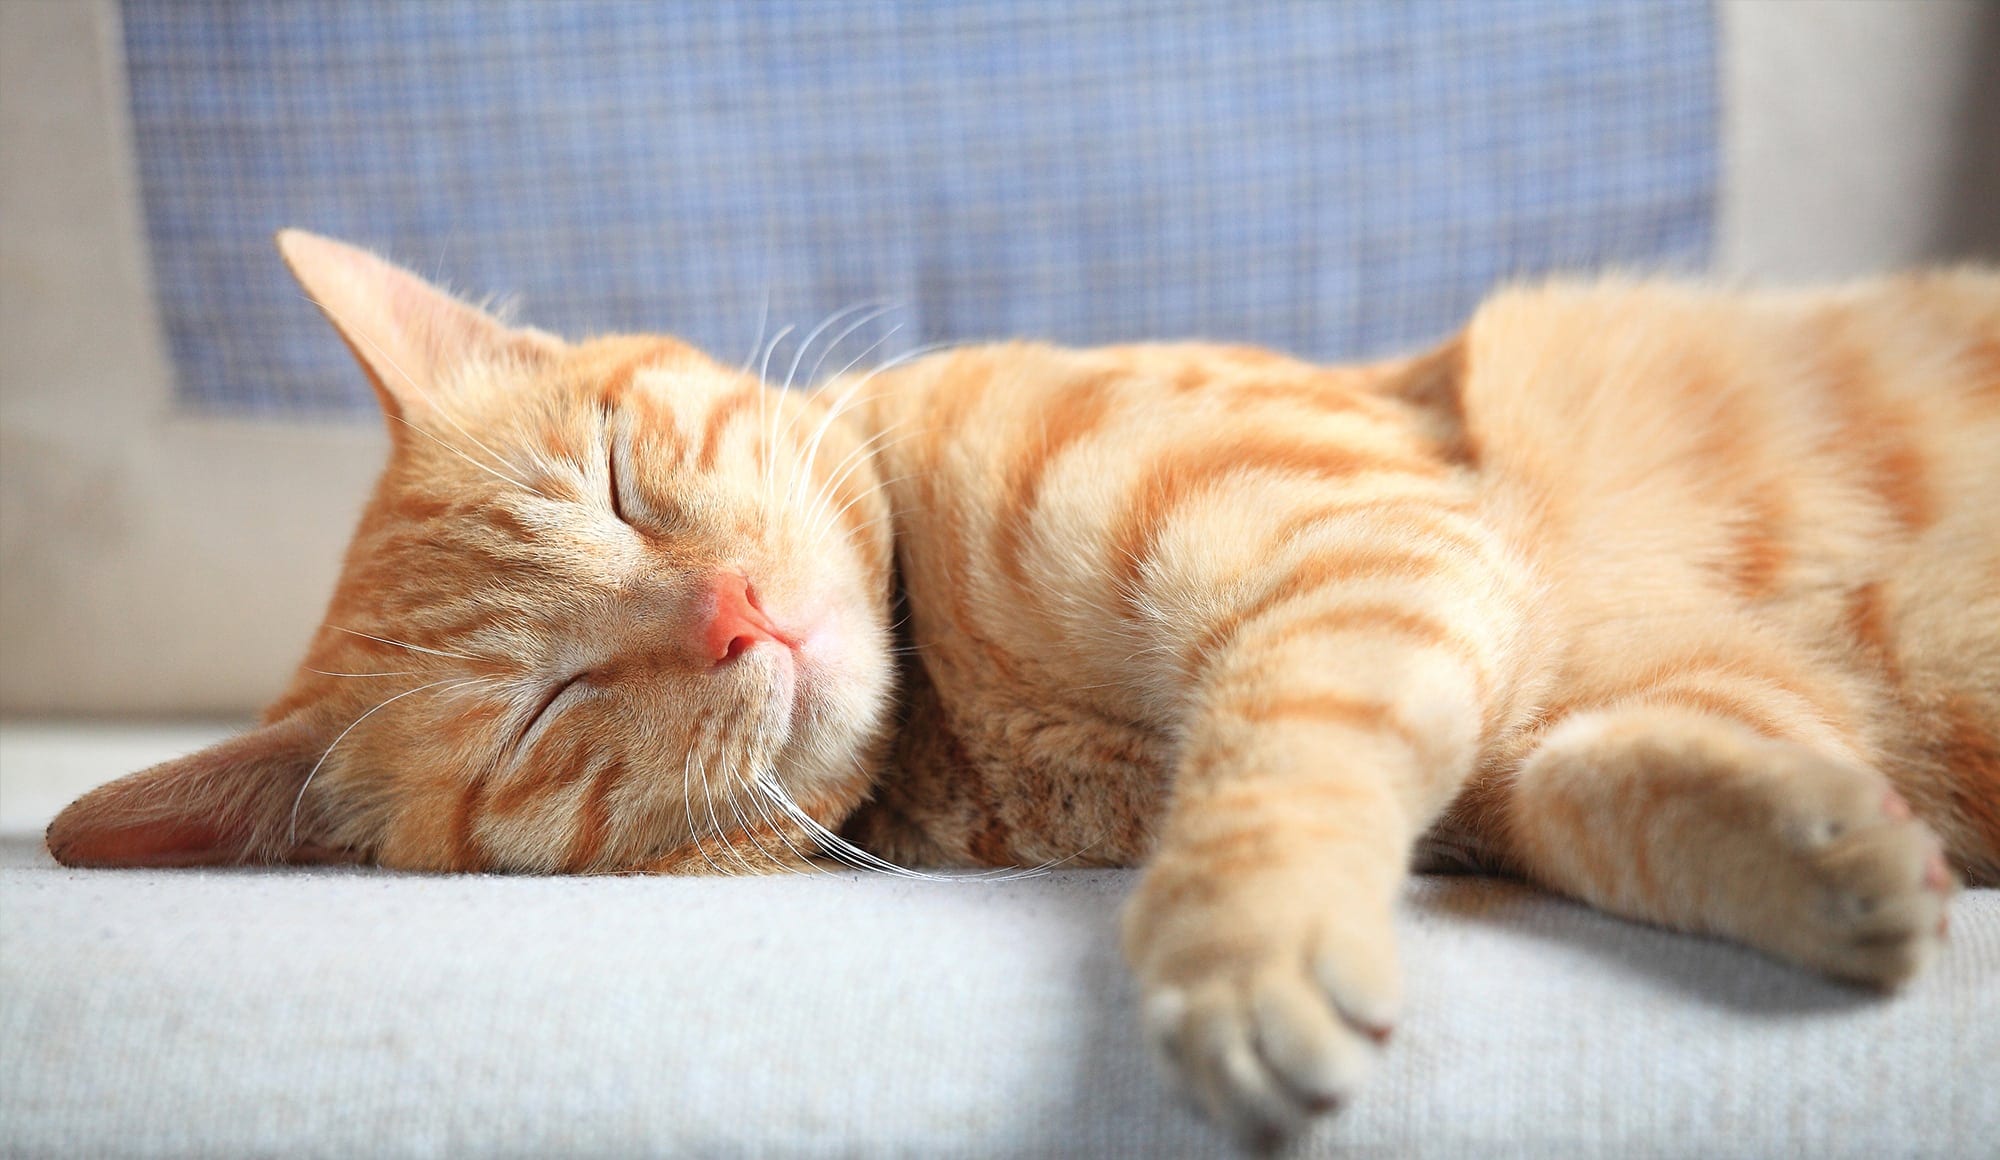 a orange striped cat sleeping on a gray couch